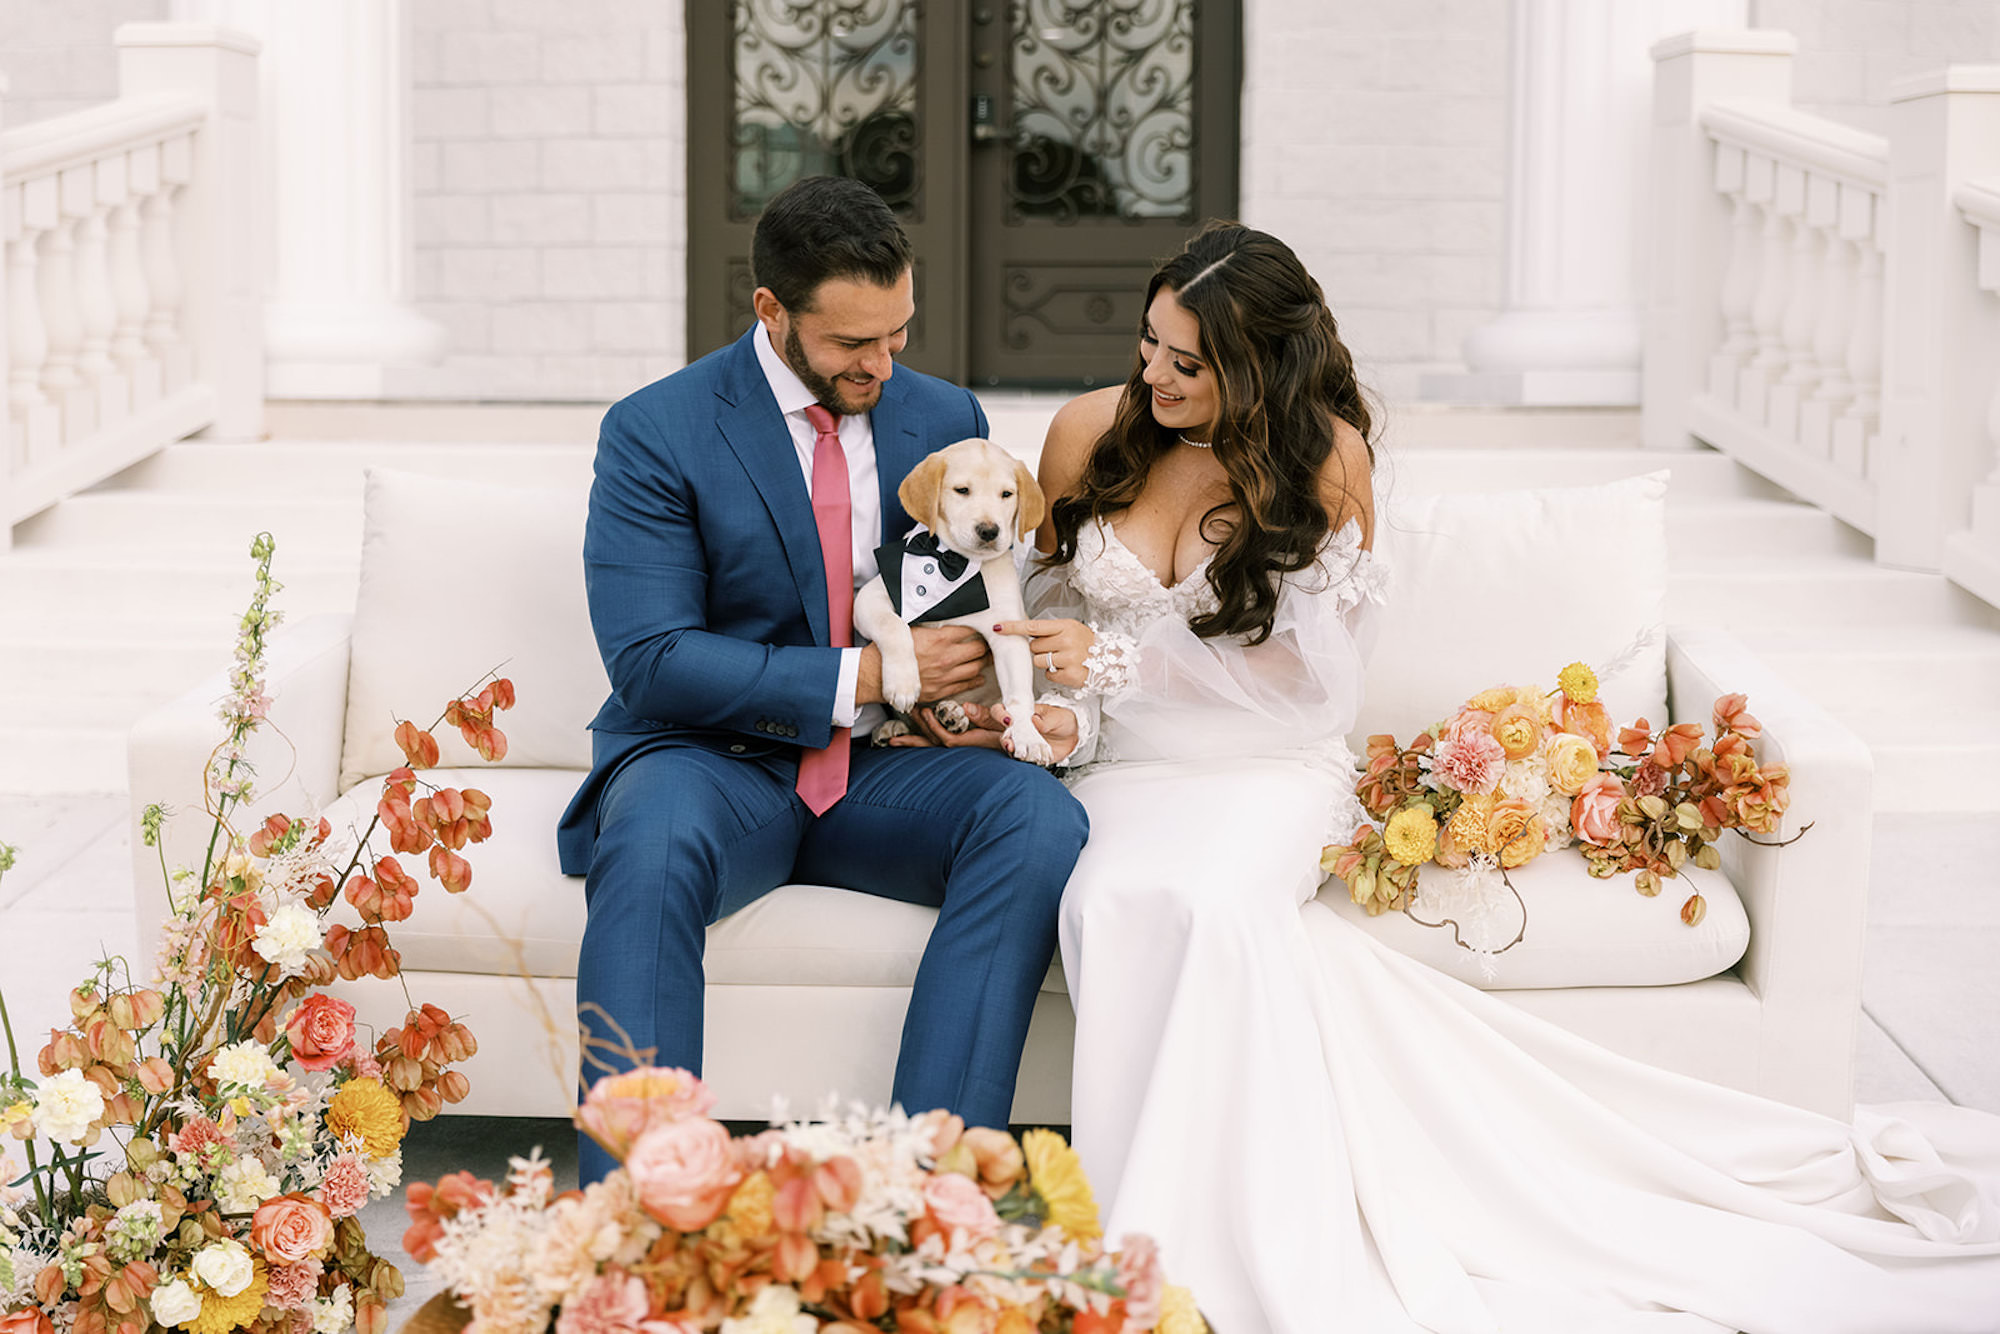 Bride and Groom with Adoptable Puppy Wedding Portrait | Unique Wedding Trends | Tampa Bay Fairytail Pet Care